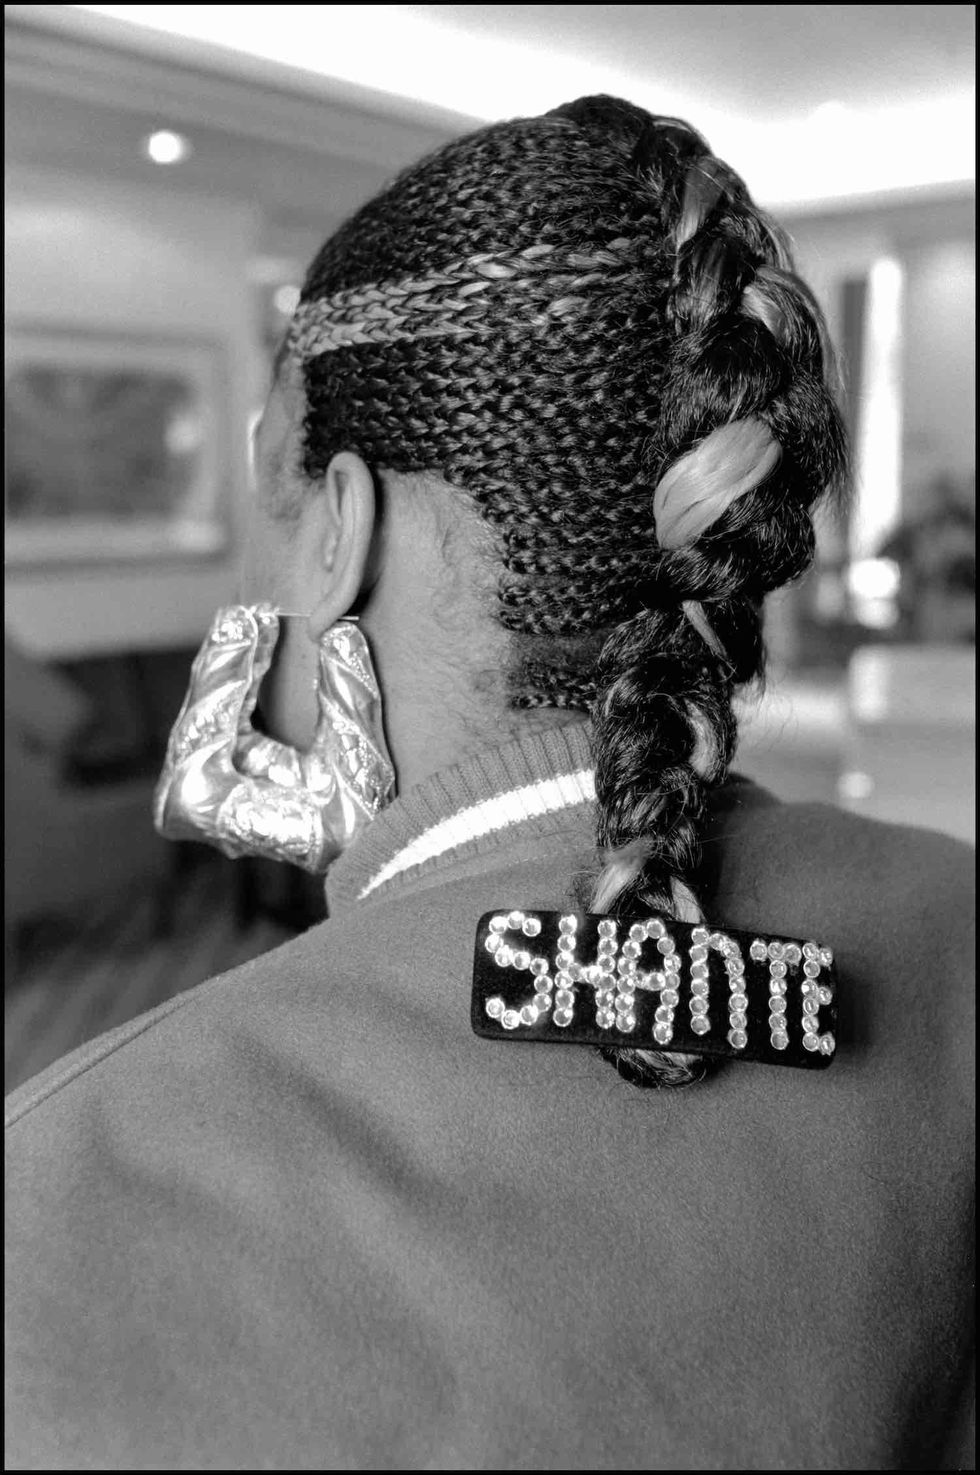 American hip hop musician and rapper Roxanne Shante, UK, 14th March, 1989.